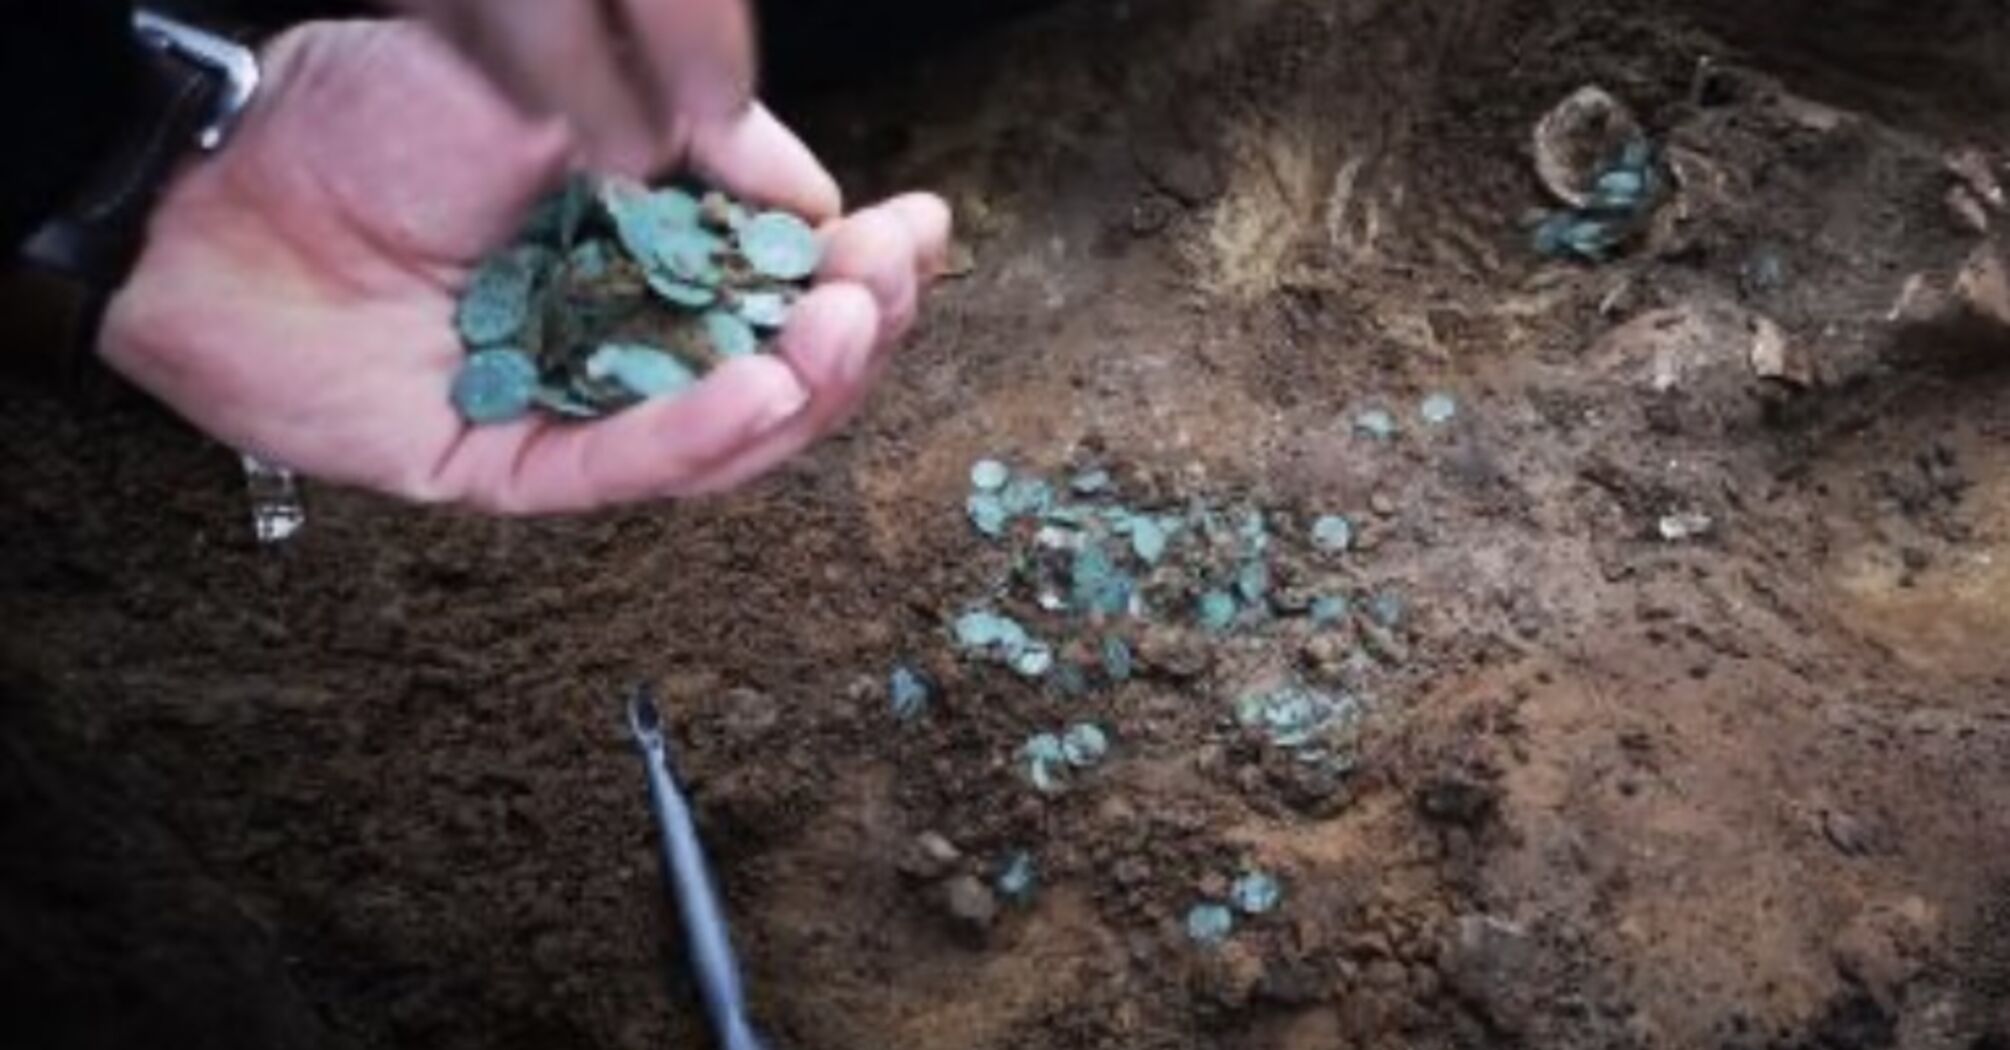 The largest medieval treasure in the Pest district found in Hungary